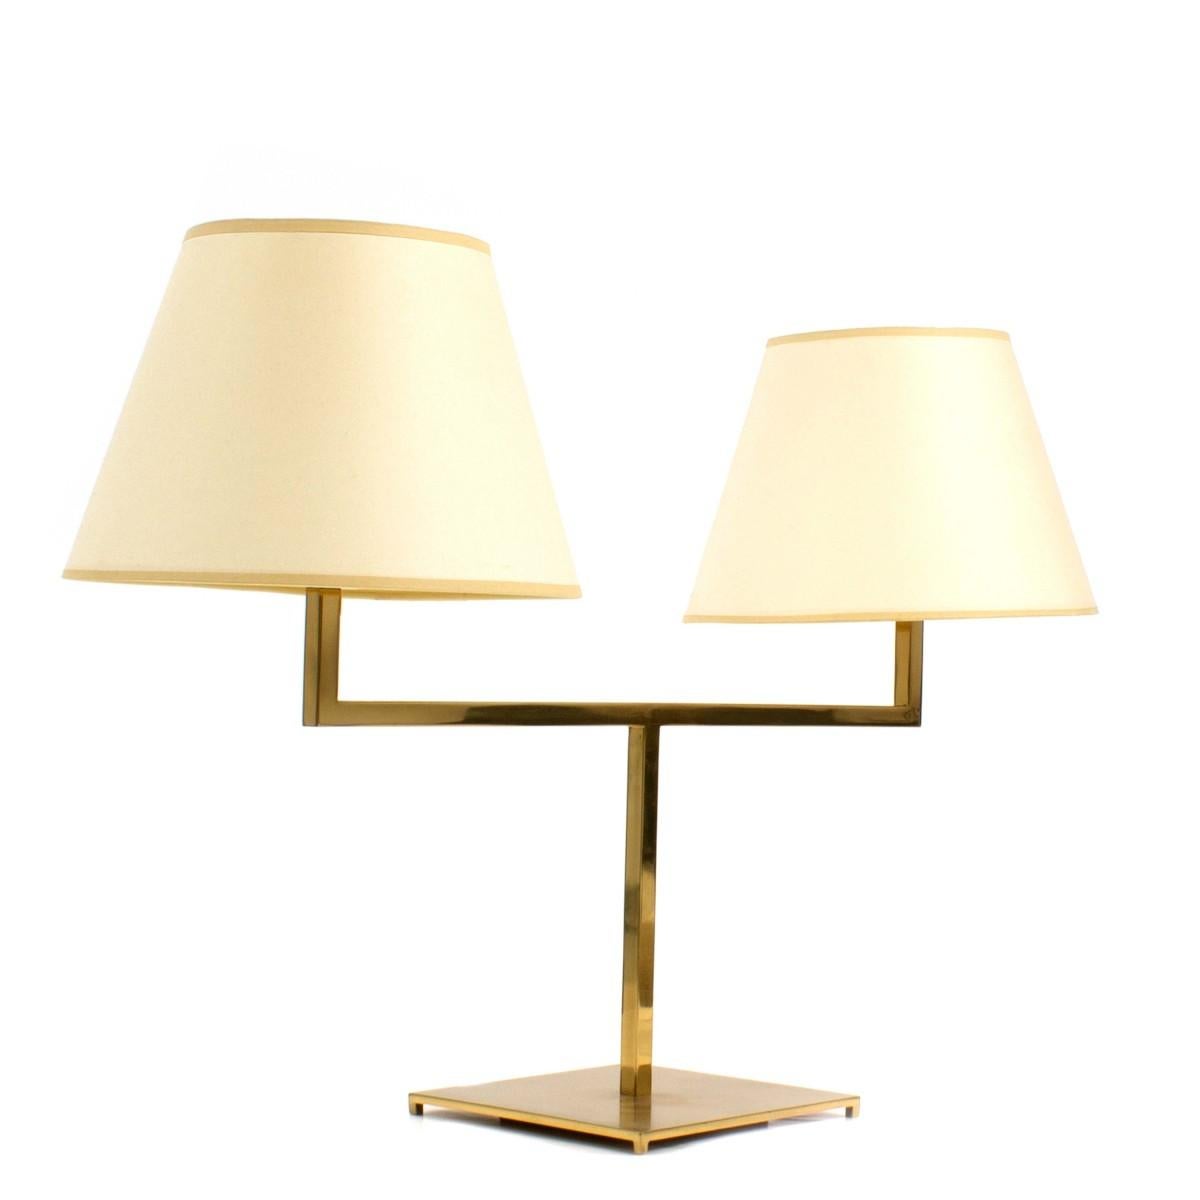 A brass two-arm library style desk lamp with shades by George Hansen. USA, circa 1960.

Dimensions:
33.5 inches L
8.5 inches D
22 inches H.